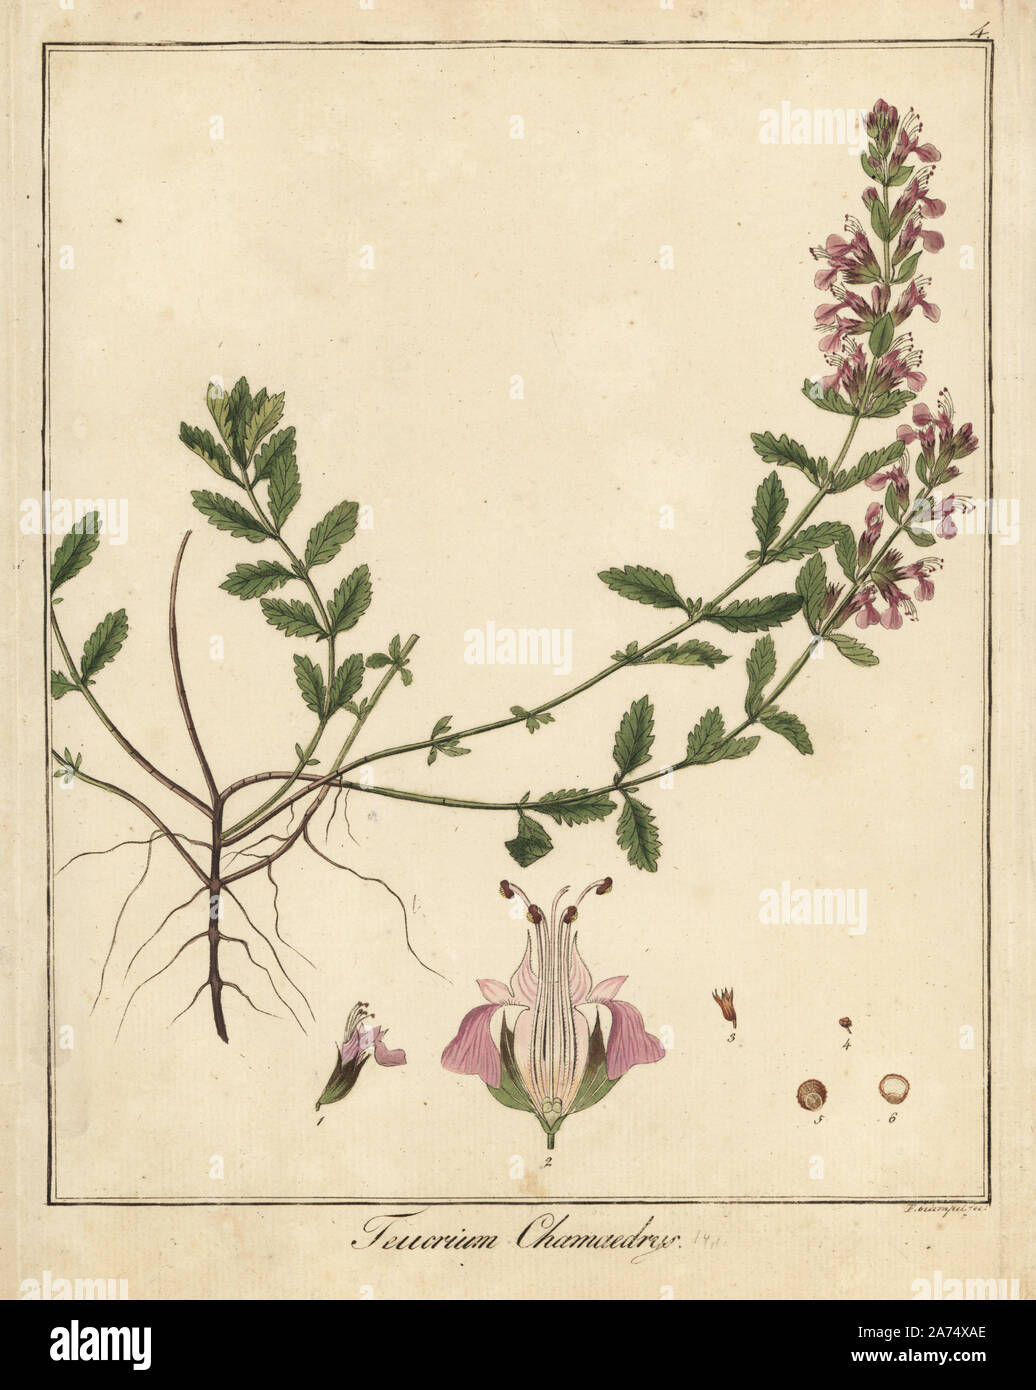 Wall germander, Teucrium chamaedrys. Handcoloured copperplate engraving by F. Guimpel from Dr. Friedrich Gottlob Hayne's Medical Botany, Berlin, 1822. Hayne (1763-1832) was a German botanist, apothecary and professor of pharmaceutical botany at Berlin University. Stock Photo